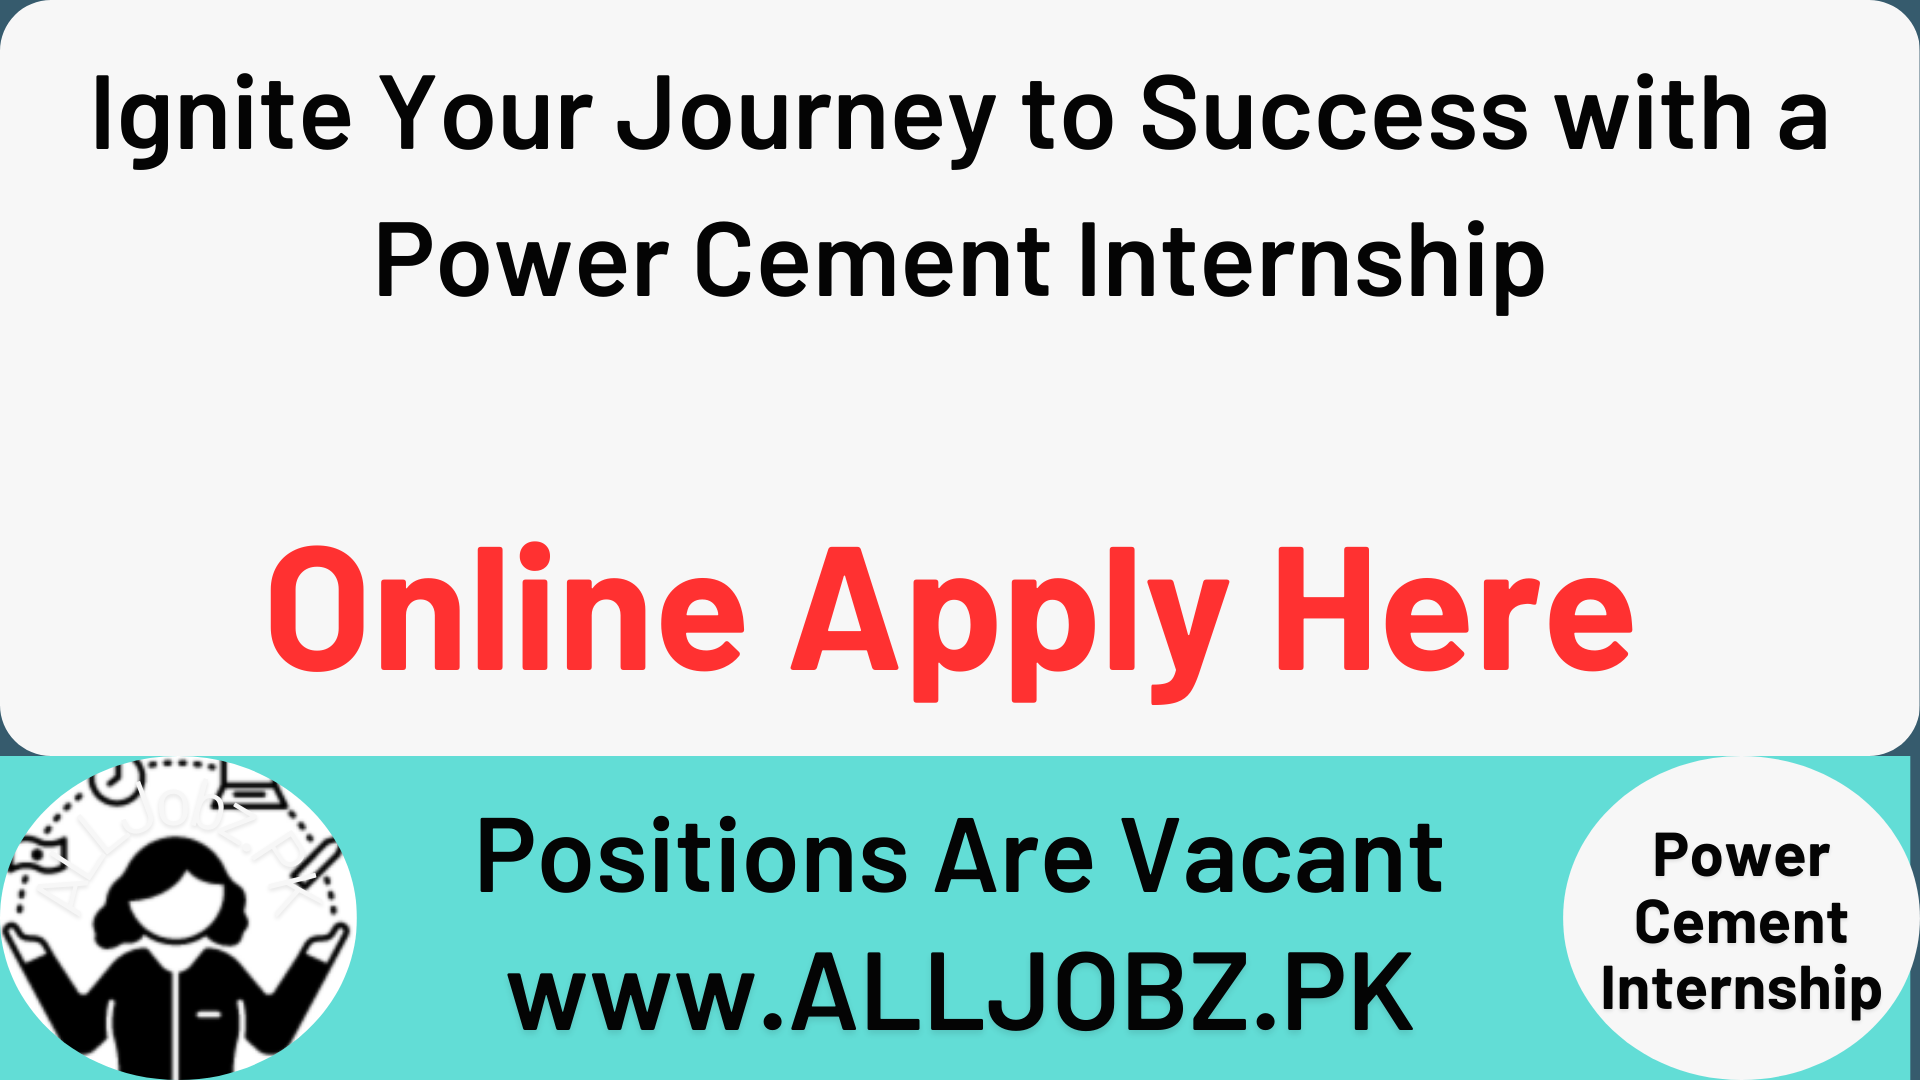 Ignite Your Journey To Success With A Power Cement Internship